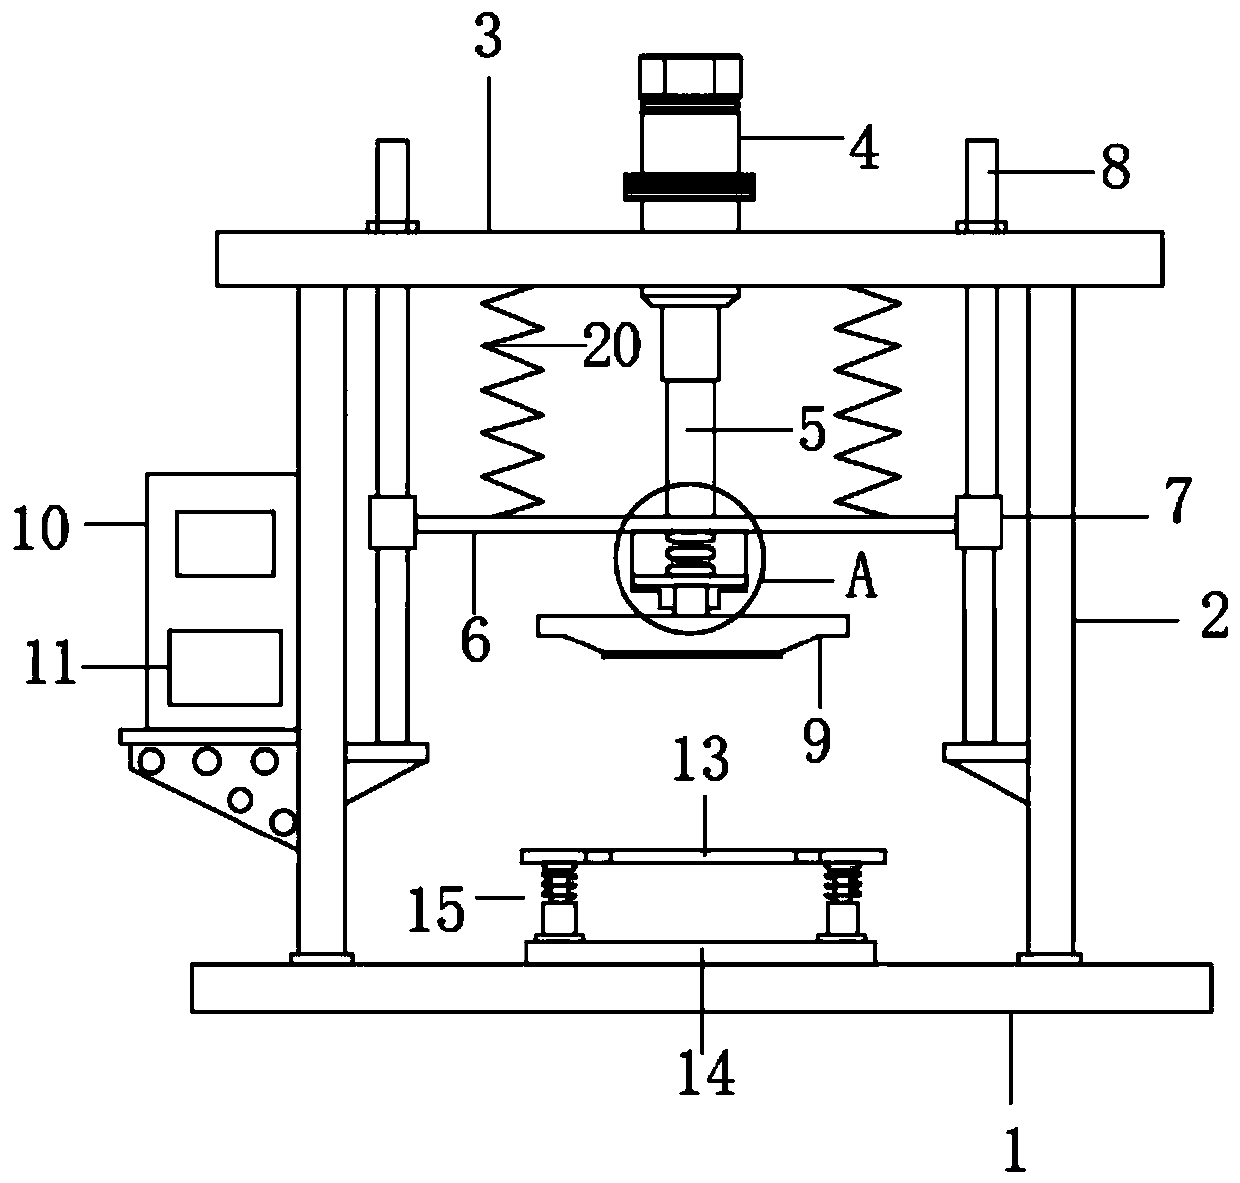 Hydraulic machine provided with automatic-sensing safety protection device